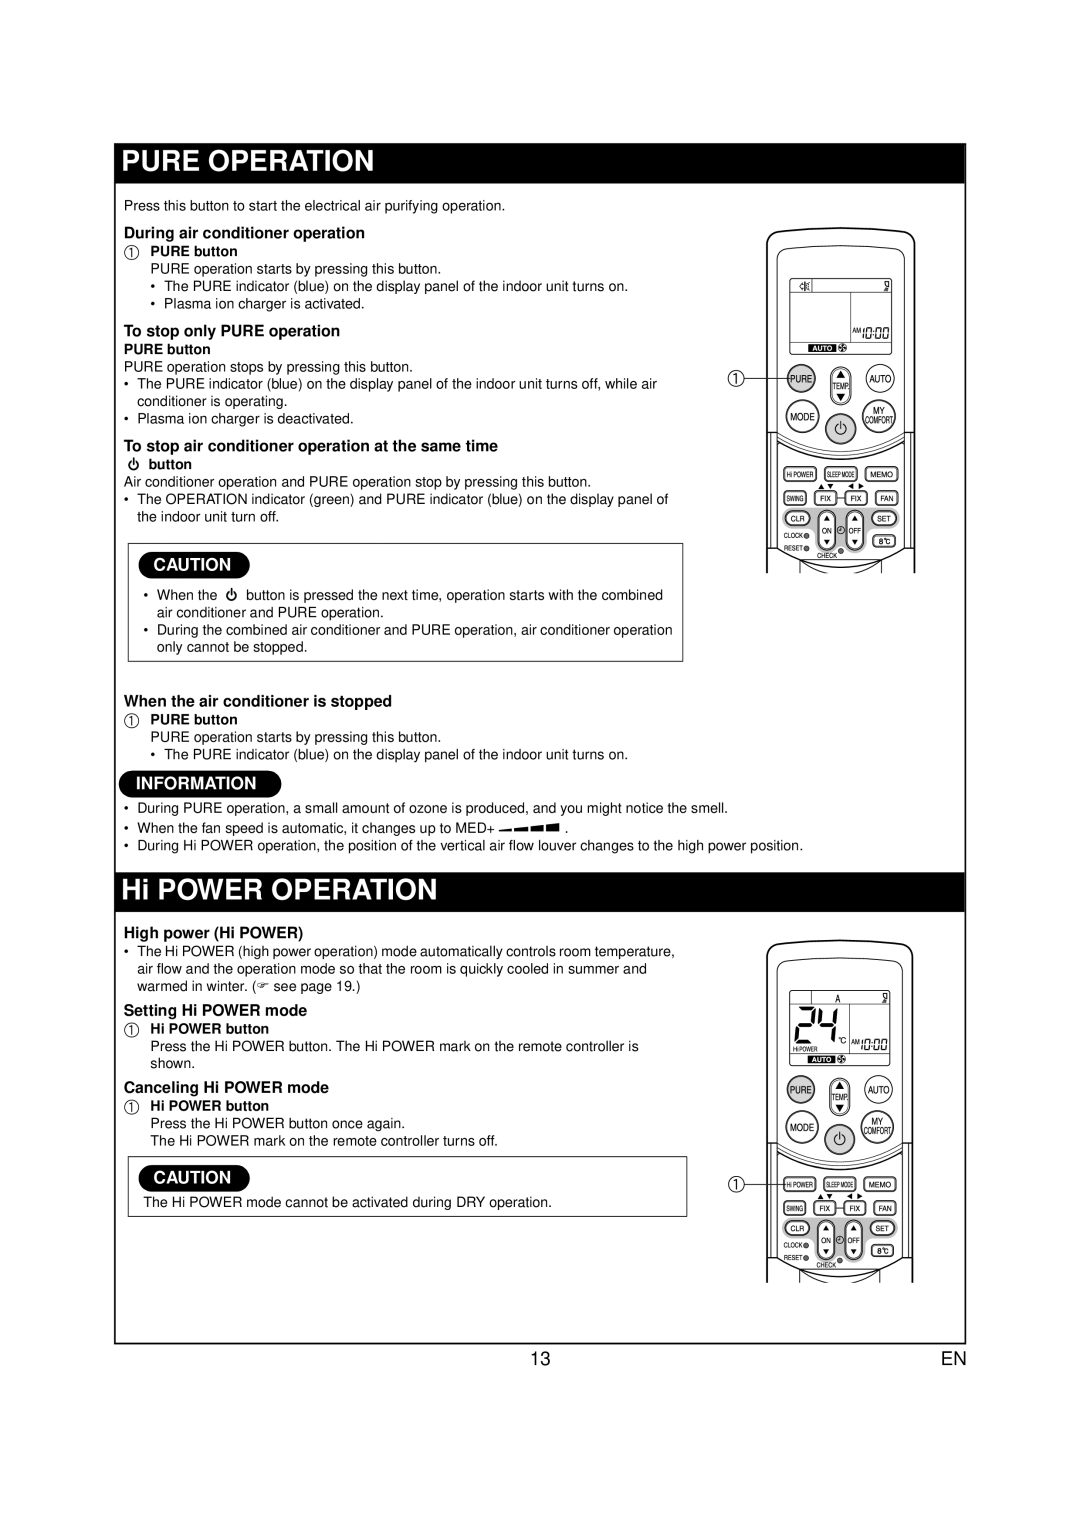 Toshiba RAS-07PKVP-E Pure Operation, Hi POWER OPERATION, Information, During air conditioner operation, a PURE button 